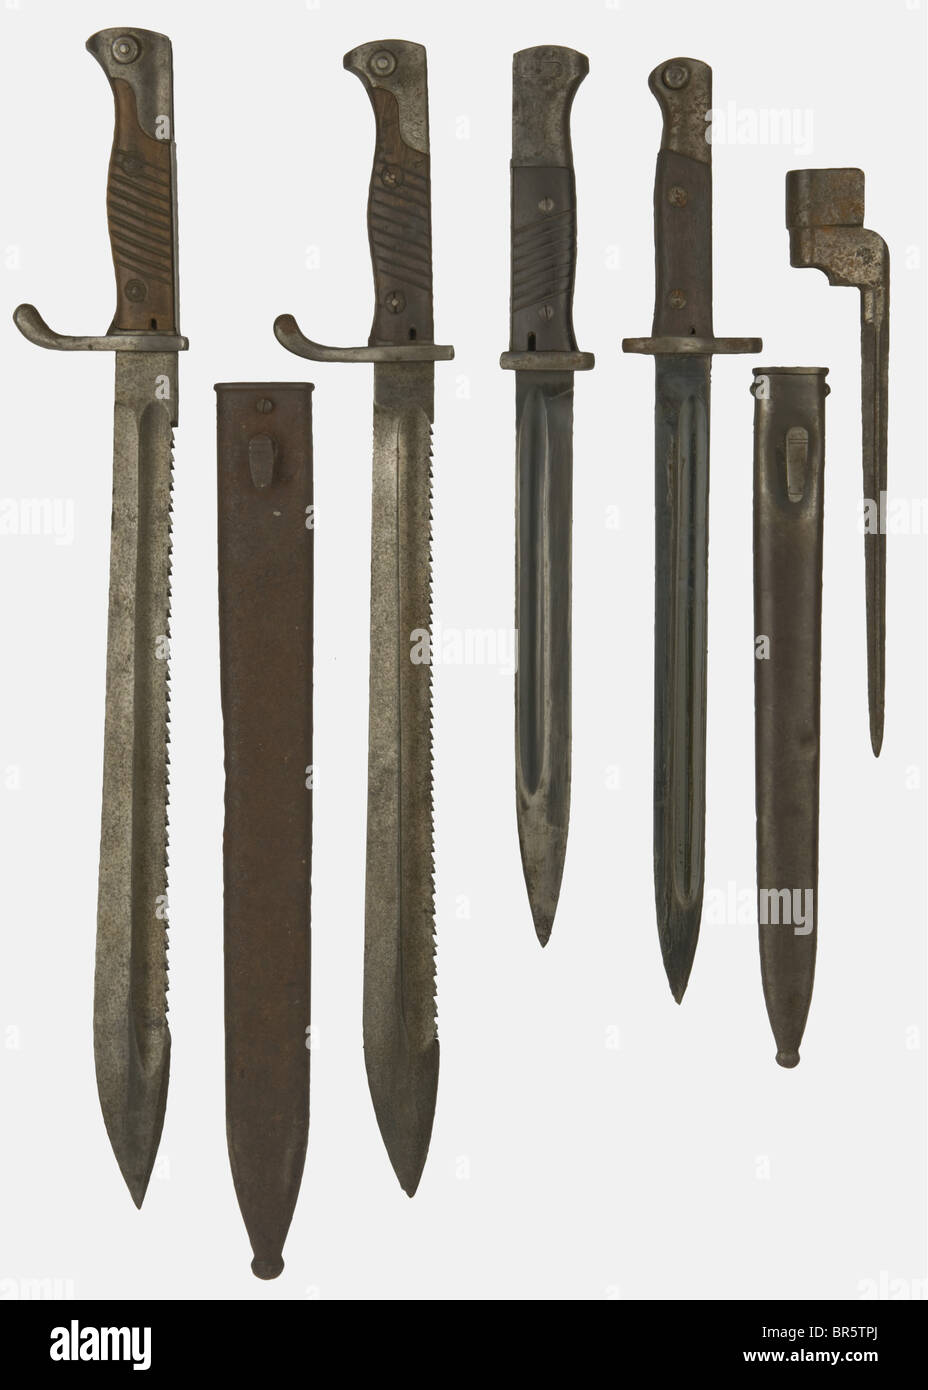 A group of edged weapons, including a German pioneer saw-back bayonet pattern 98/05, no number or maker's mark visible (corroded), with its scabbard, a German pattern 84/98 bayonet, stamped on the blade 'Gebr. Heller', with bakelite grip scales, WAA stamping 1937, no scabbard, a German pioneer saw-back bayonet pattern 98/05 made by the Imperial Erfurt arsenal, no scabbard, a Mauser export bayonet FN 1908 used mainly on the Yugoslavian Mauser pattern 1924, and a British spike bayonet without scabbard. historic, historical, 1900s, 1920s, 1930s, 20th century, 20th, Stock Photo